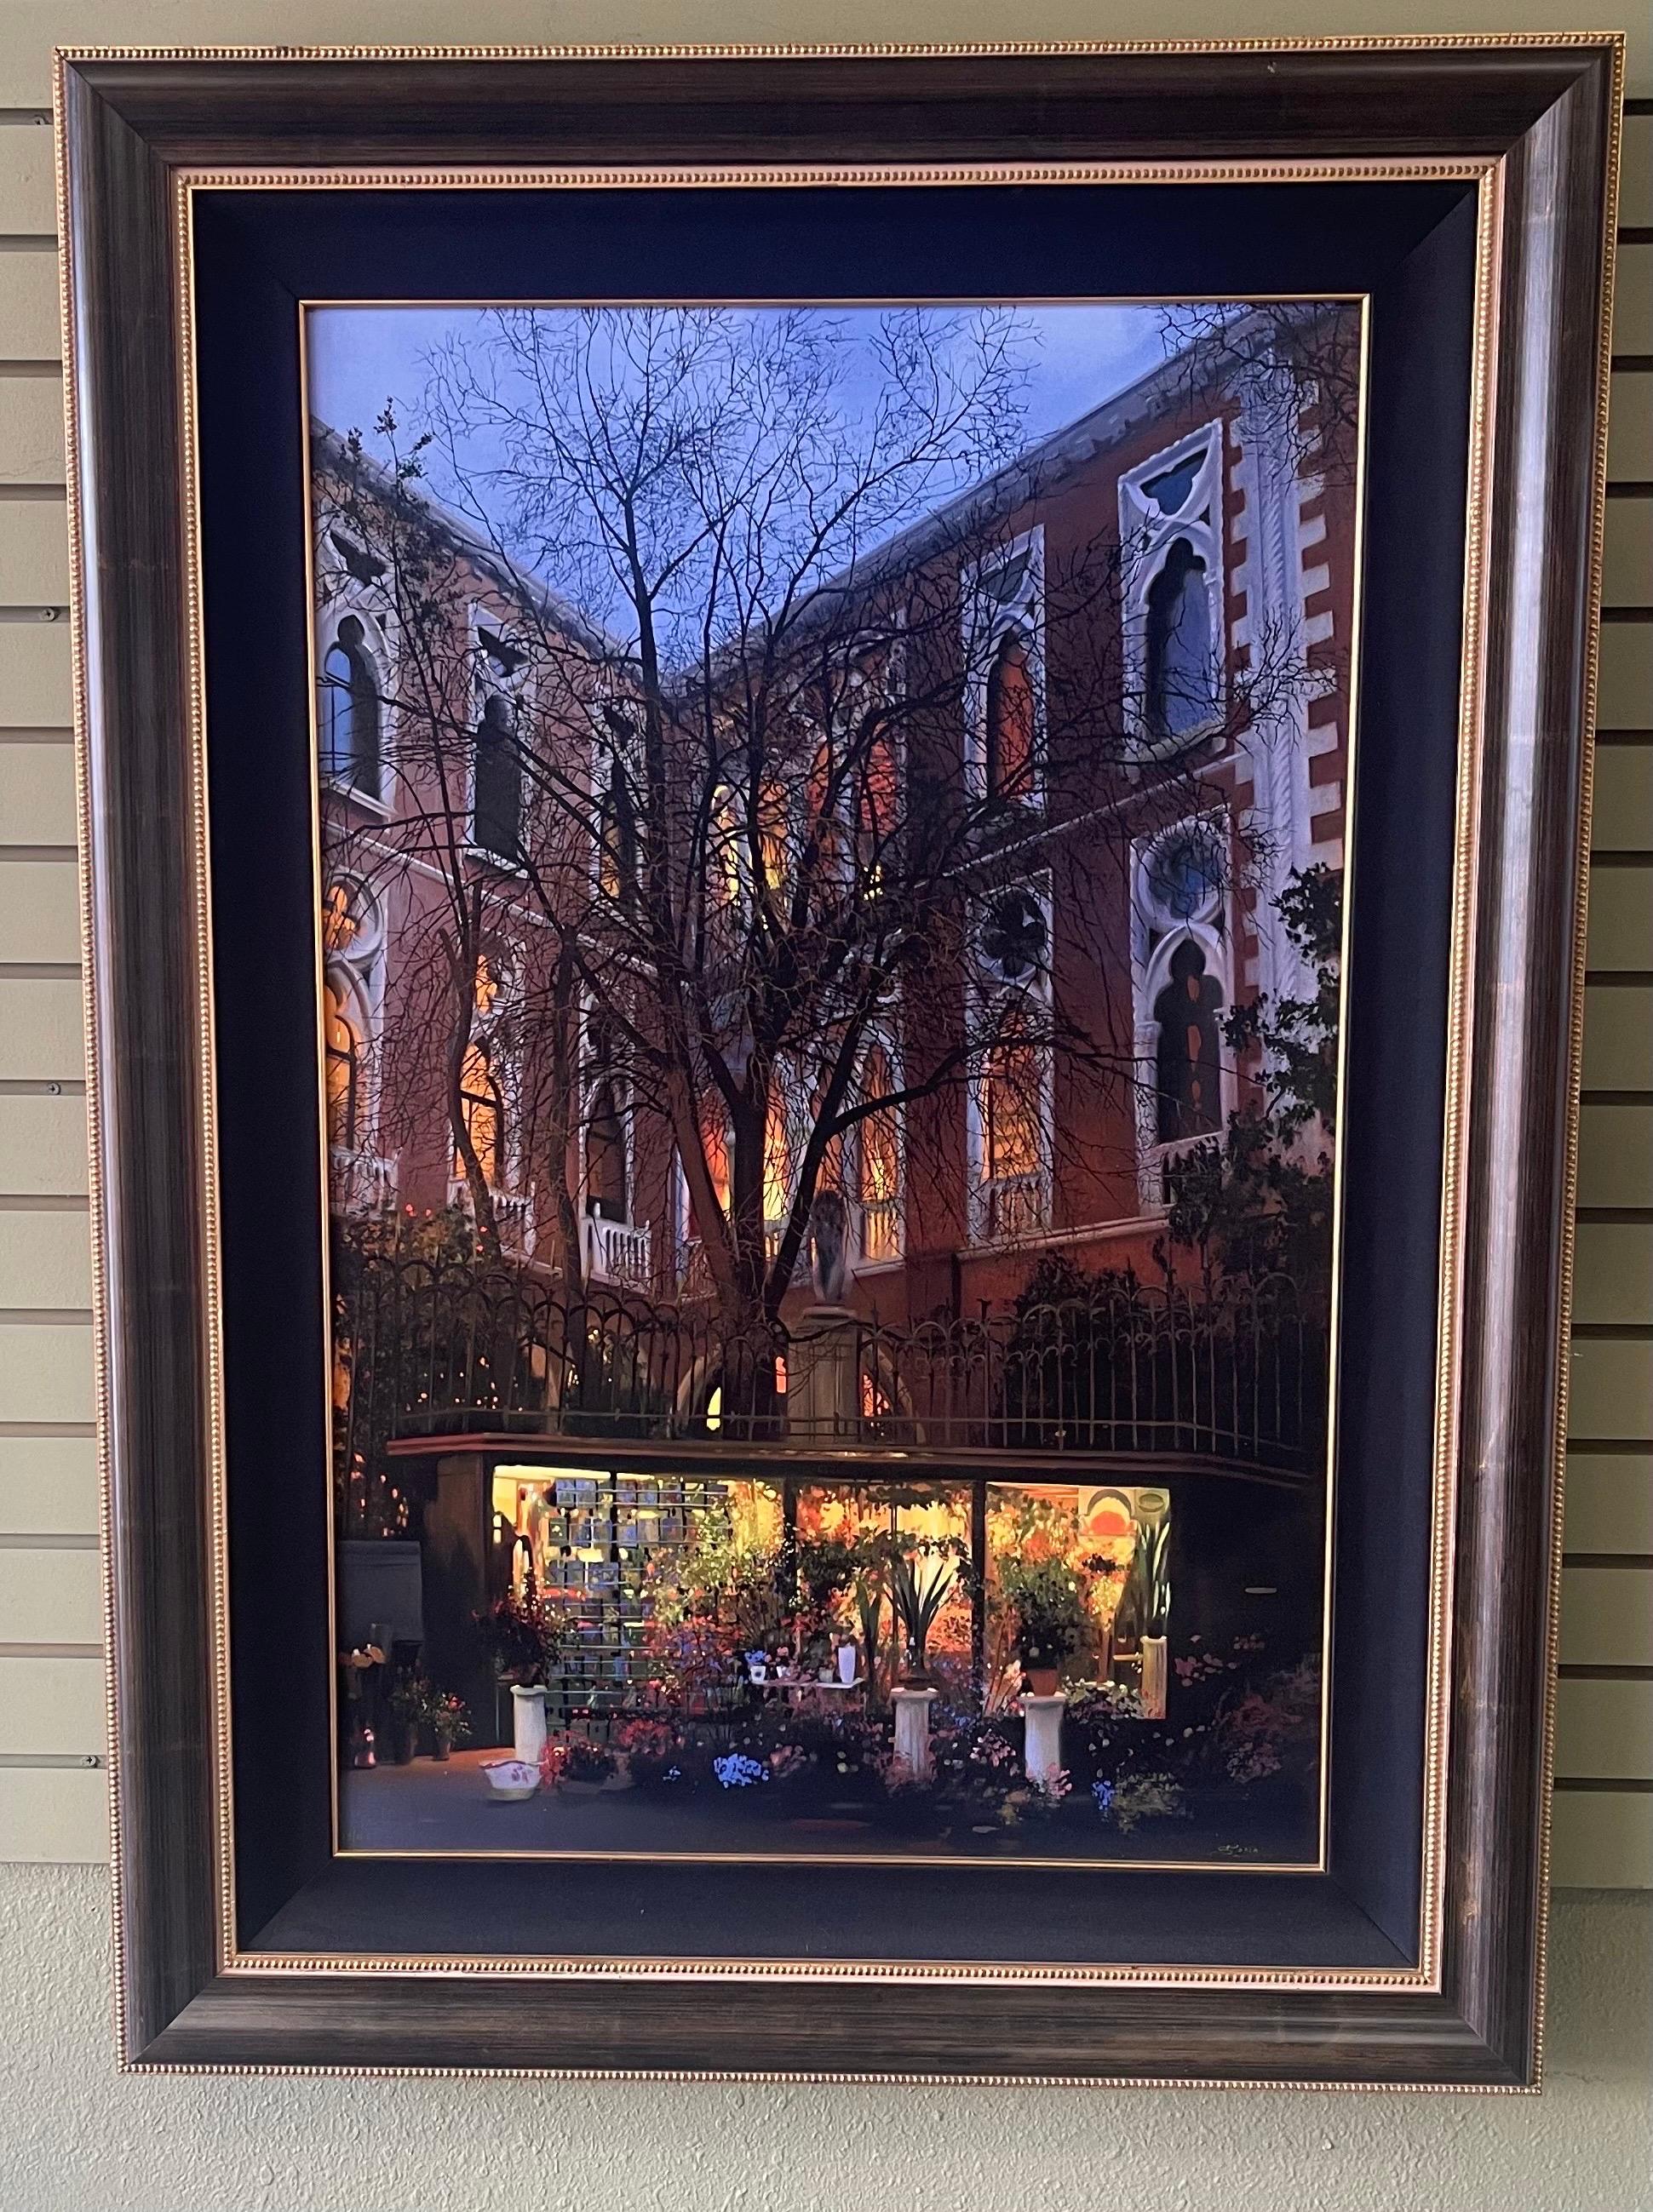 Large photo-realistic European courtyard original oil painting by Vladimir Sorin, circa 2010s. This piece is truly amazing and will have you double checking whether it really is a painting and not a photograph! The piece is in very good vintage